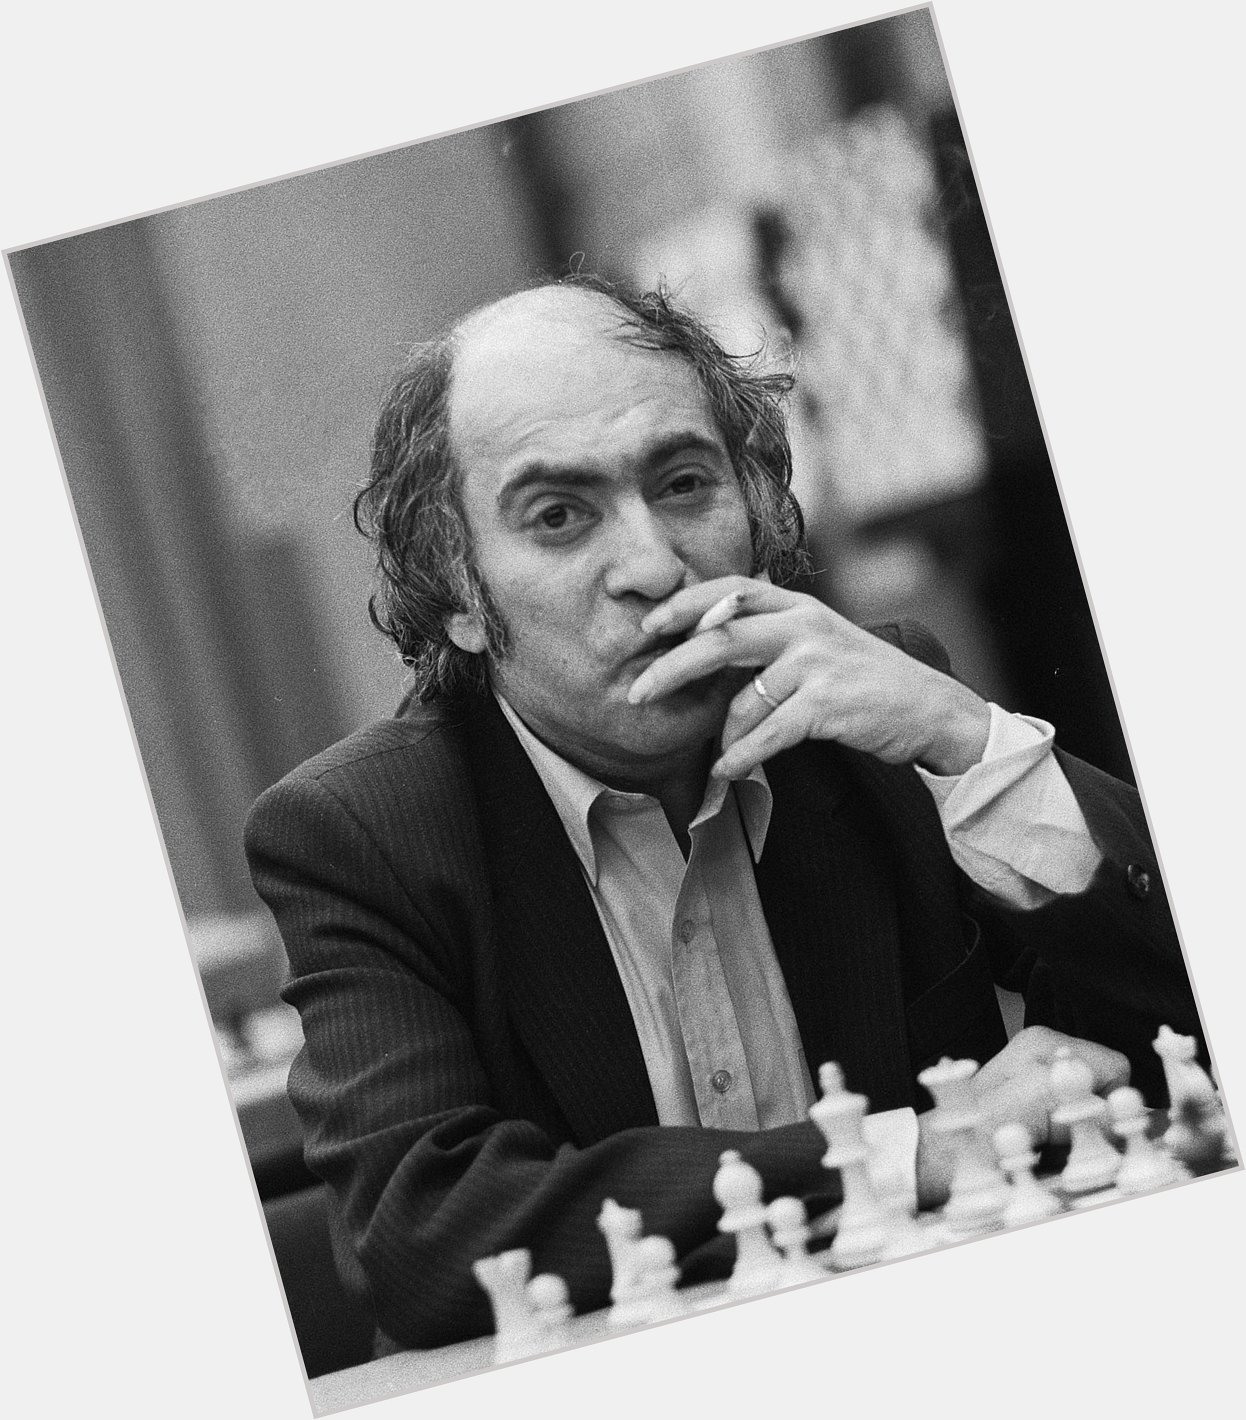 Happy Birthday to the 8th World Chess Champion Mikhail Tal! He would have been 86 years old today. 